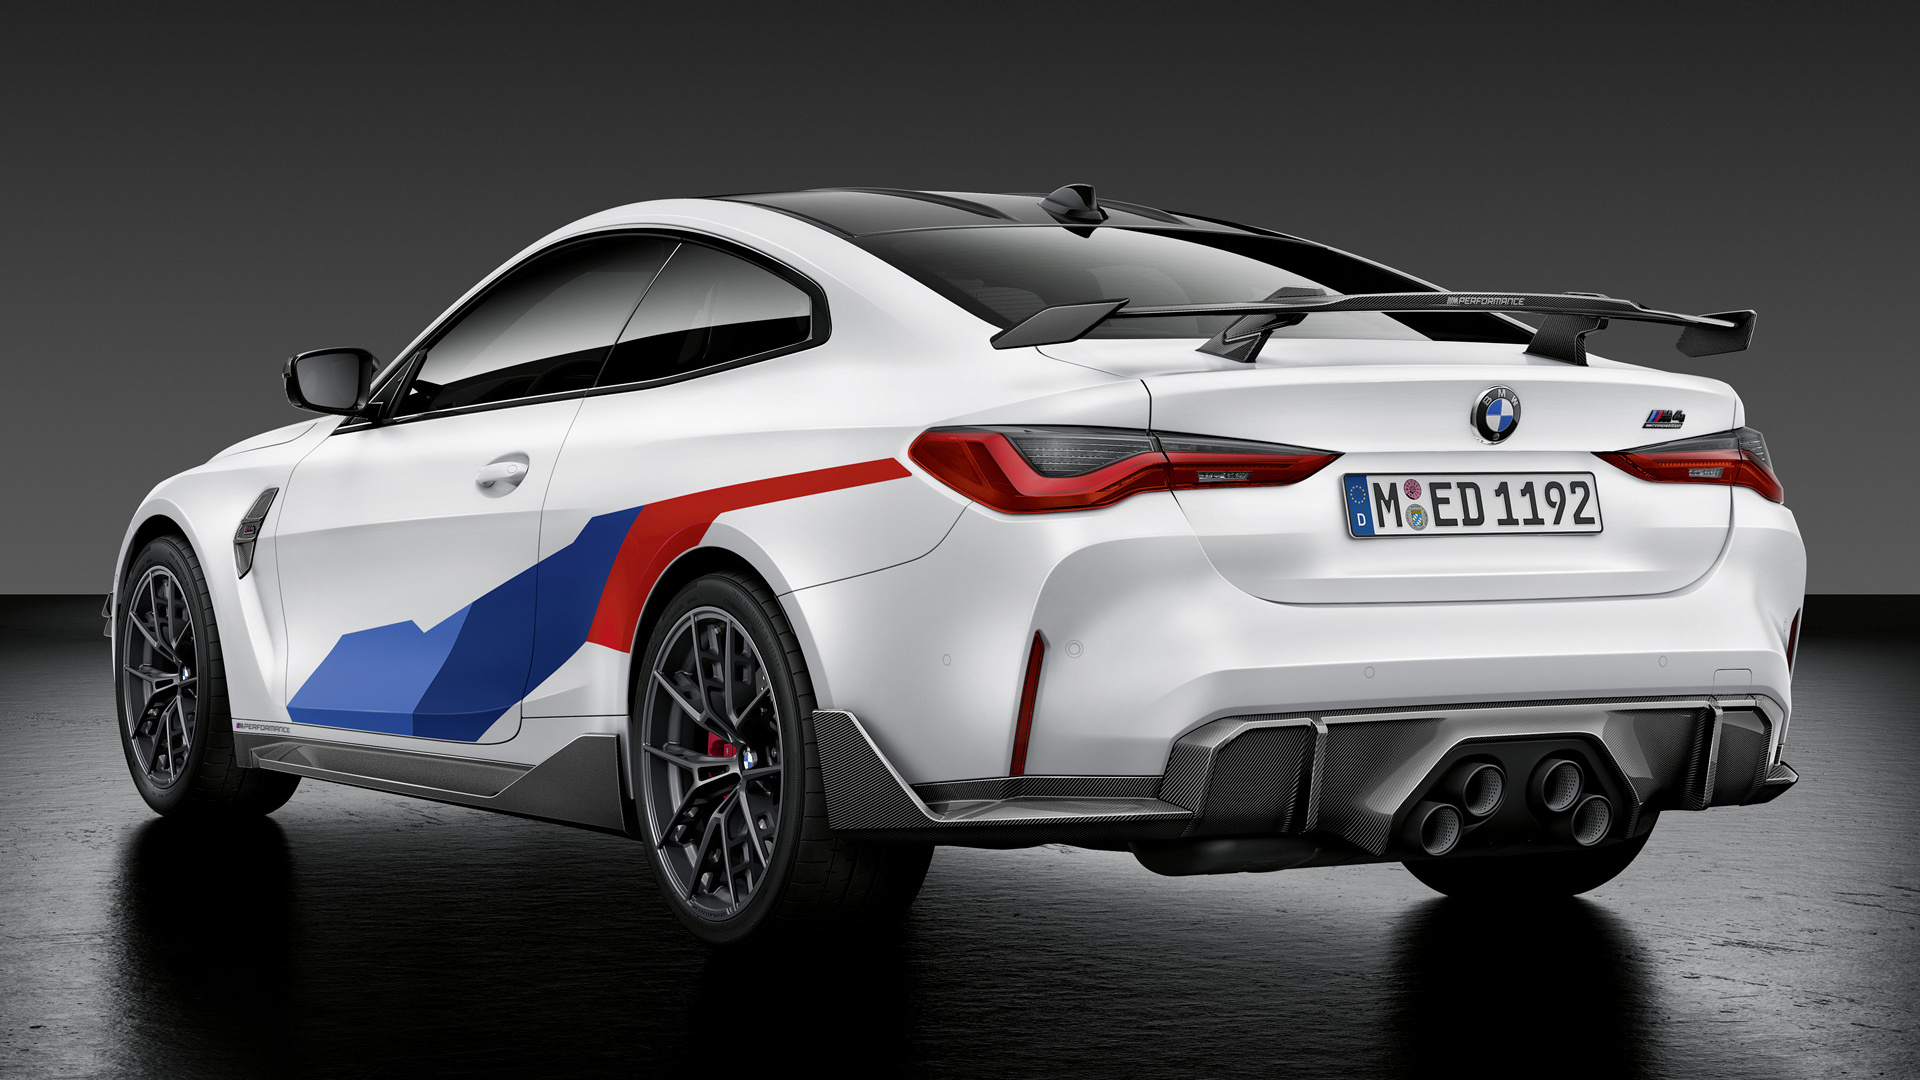 BMW M4 Coupe Competition with M Performance Parts and HD Image